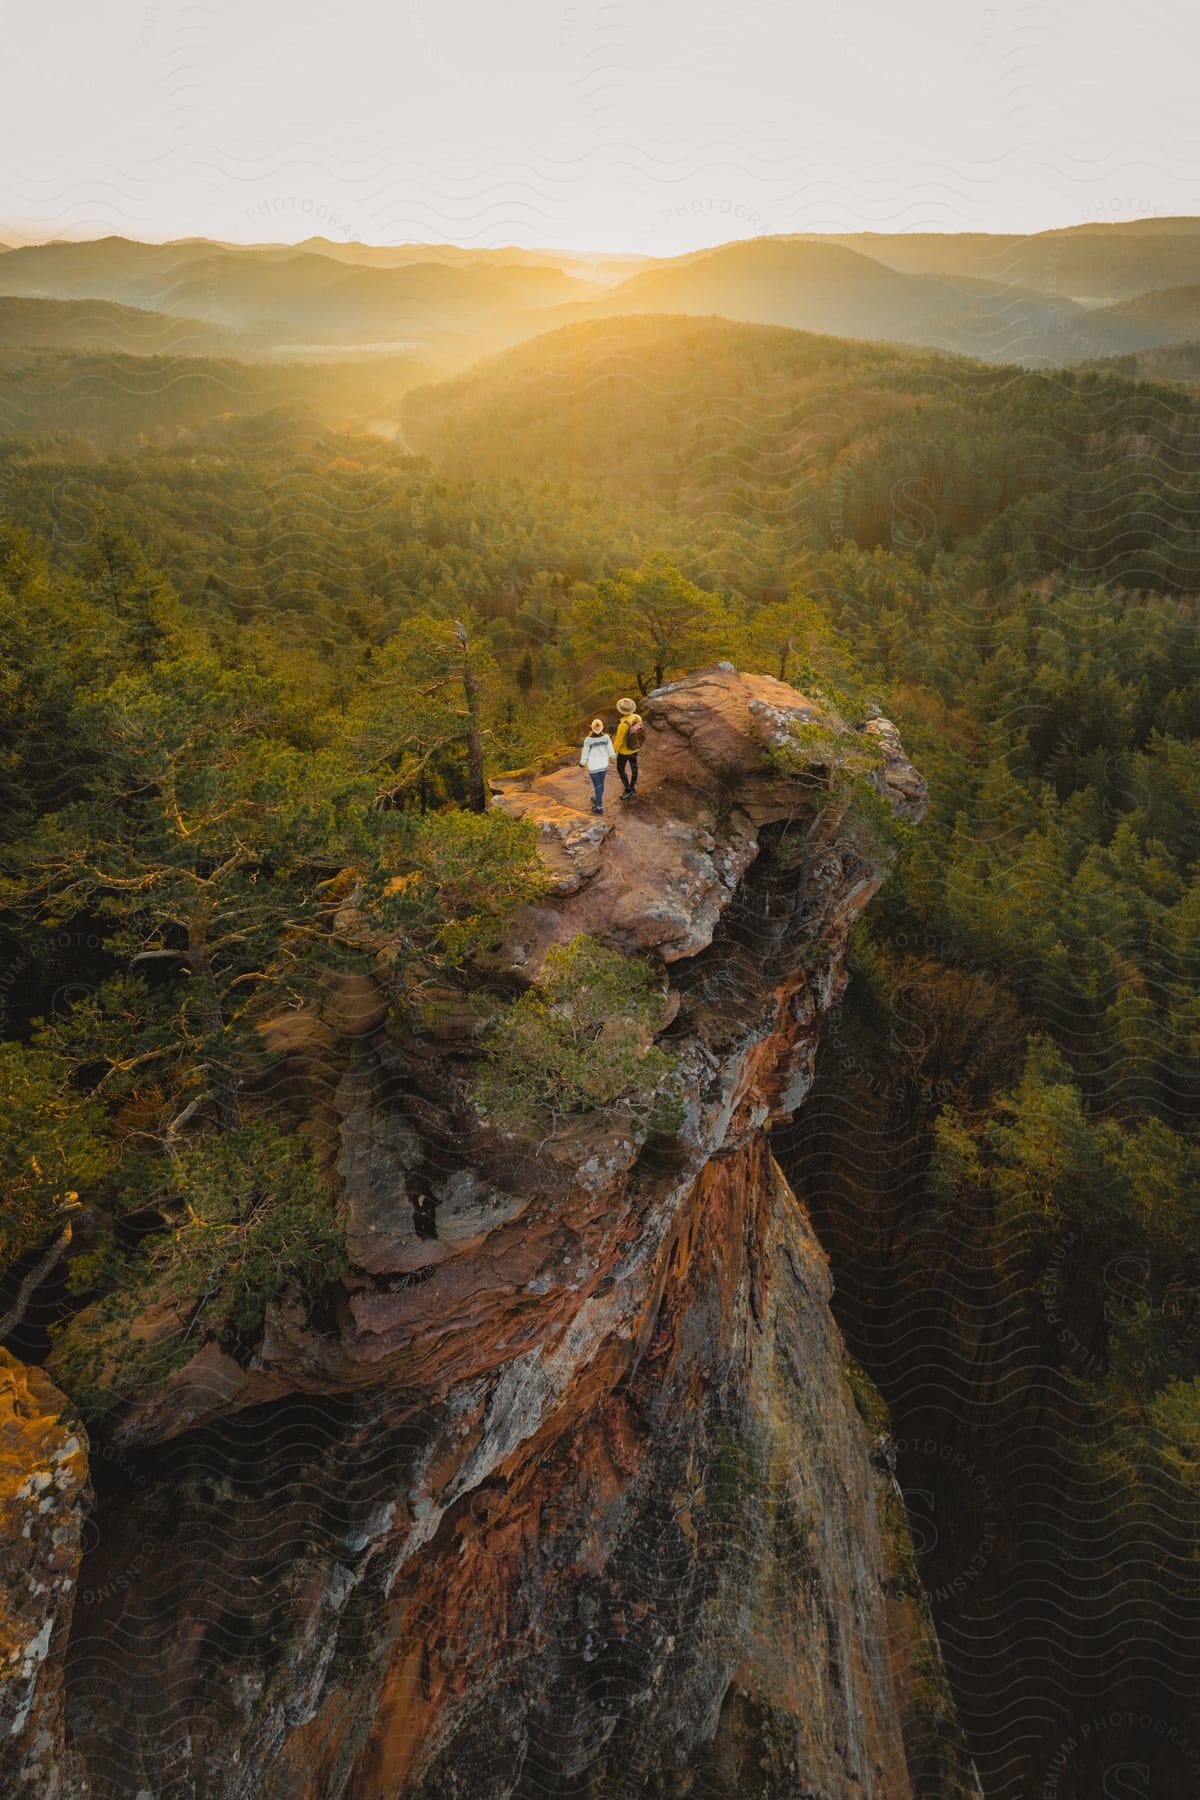 Two people standing on a mountain cliff overlooking forests and mountains as the sun shines on the horizon